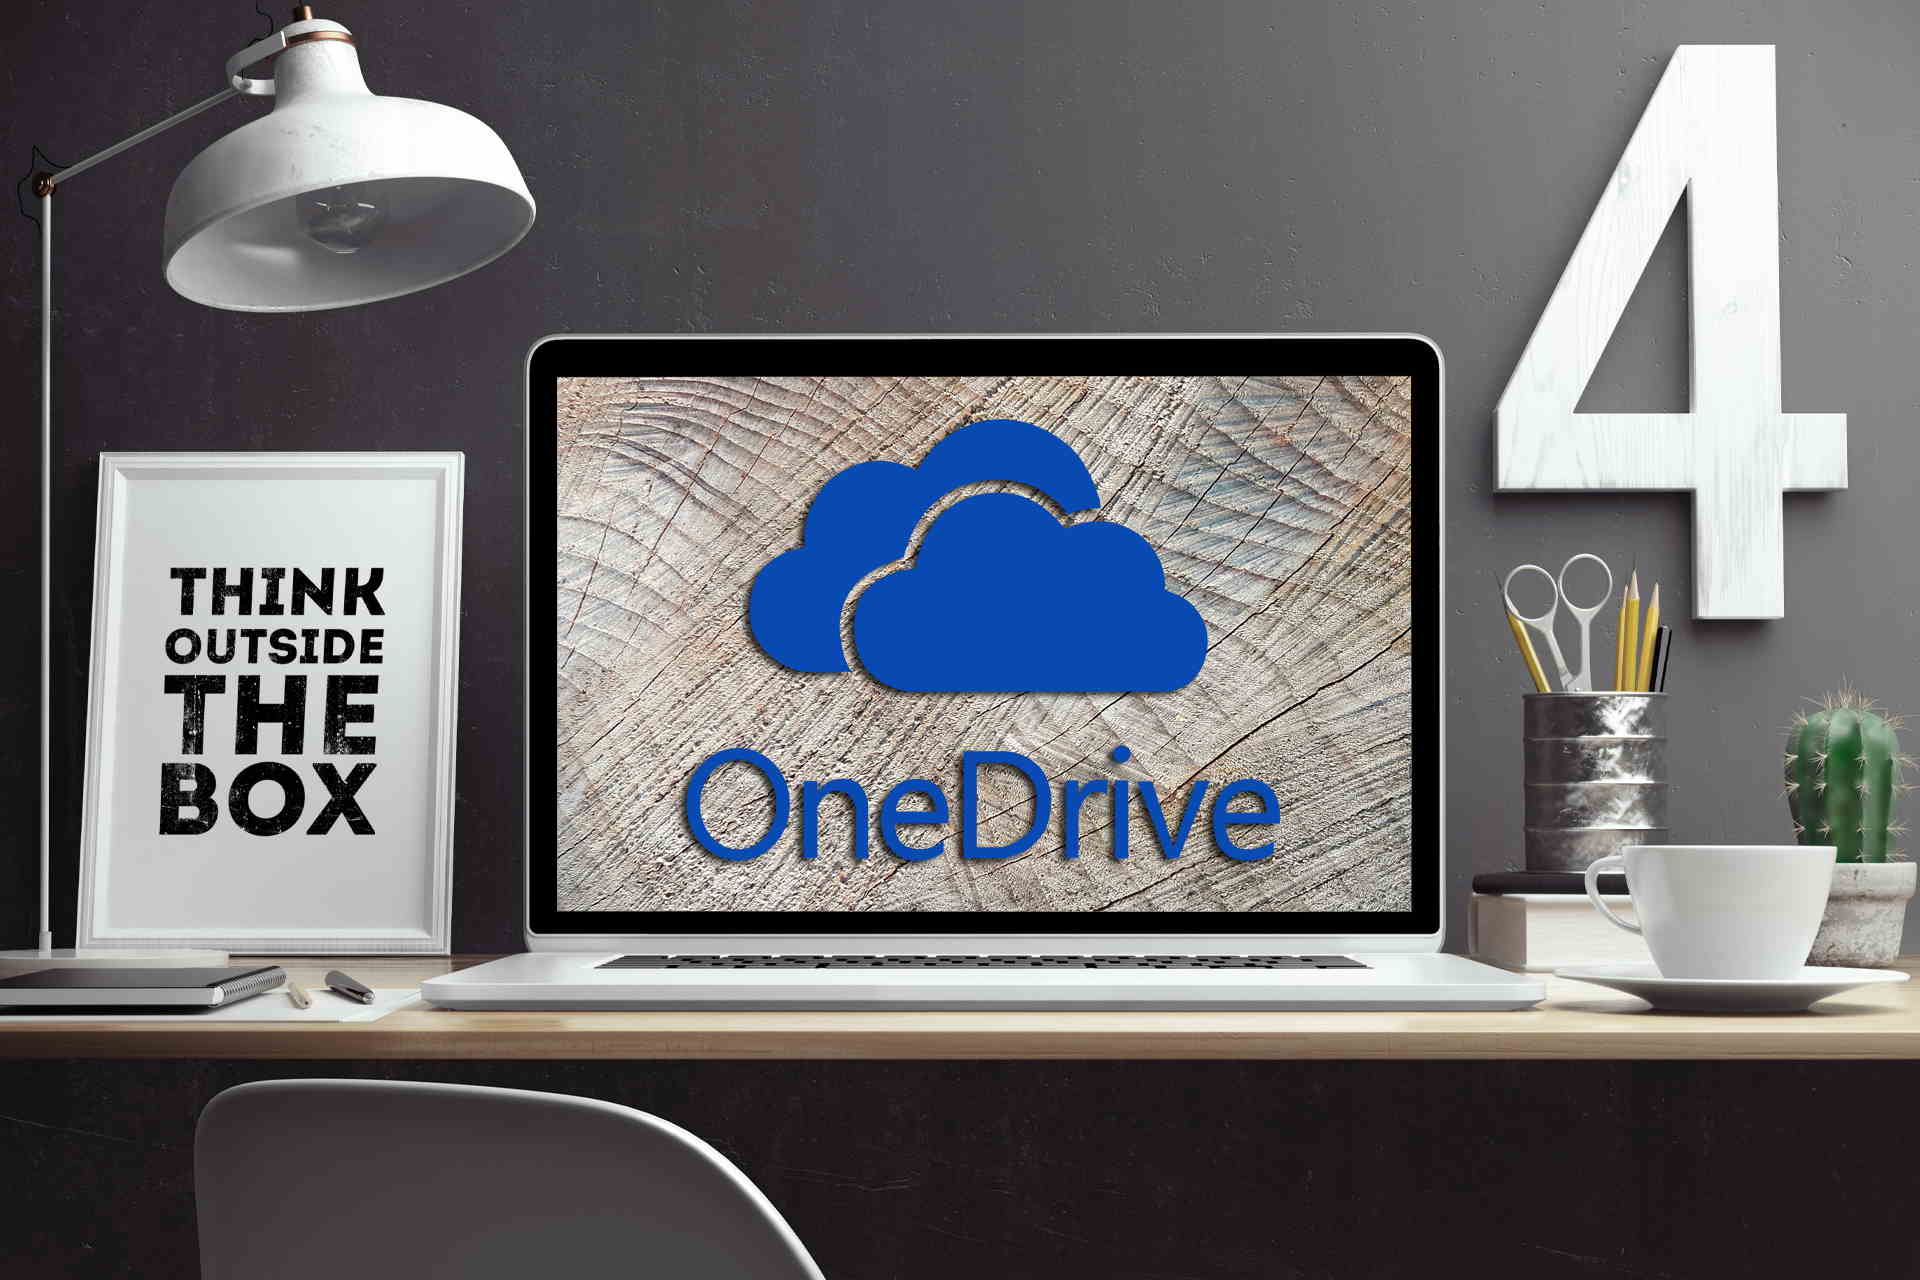 How to fix OneDrive videos not playing